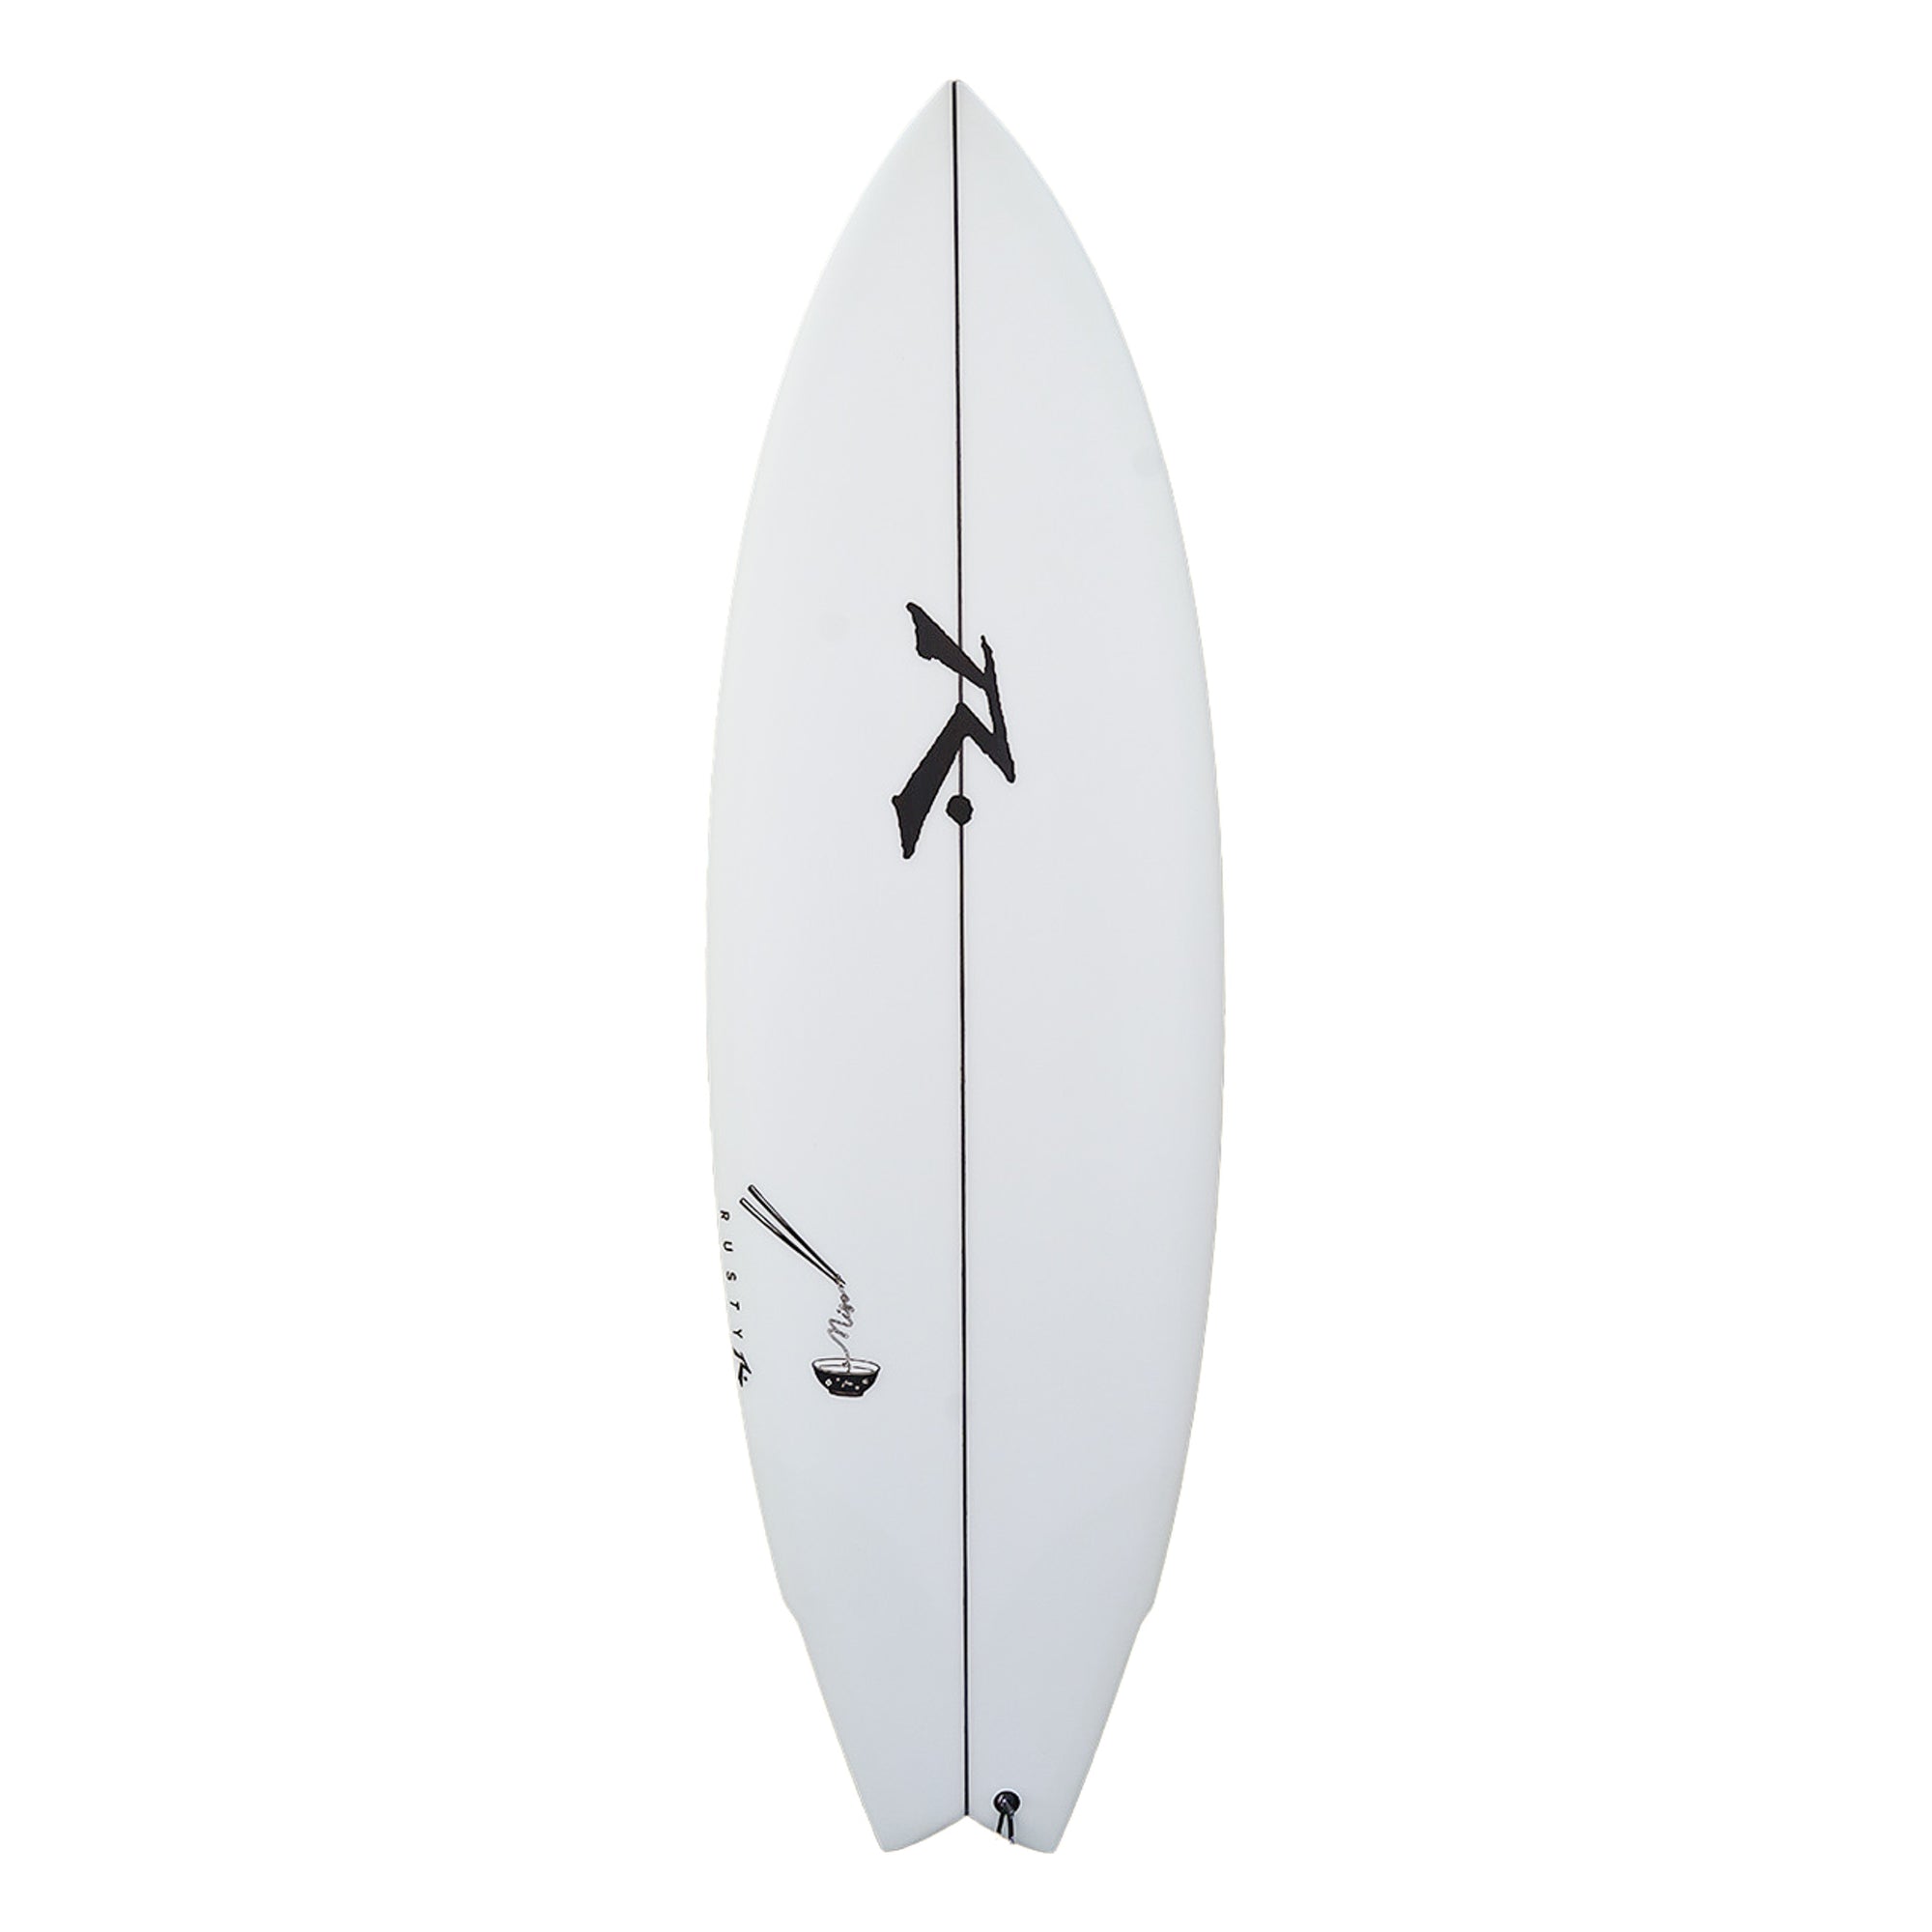 Miso - High Performance - Rusty Surfboards - Top View